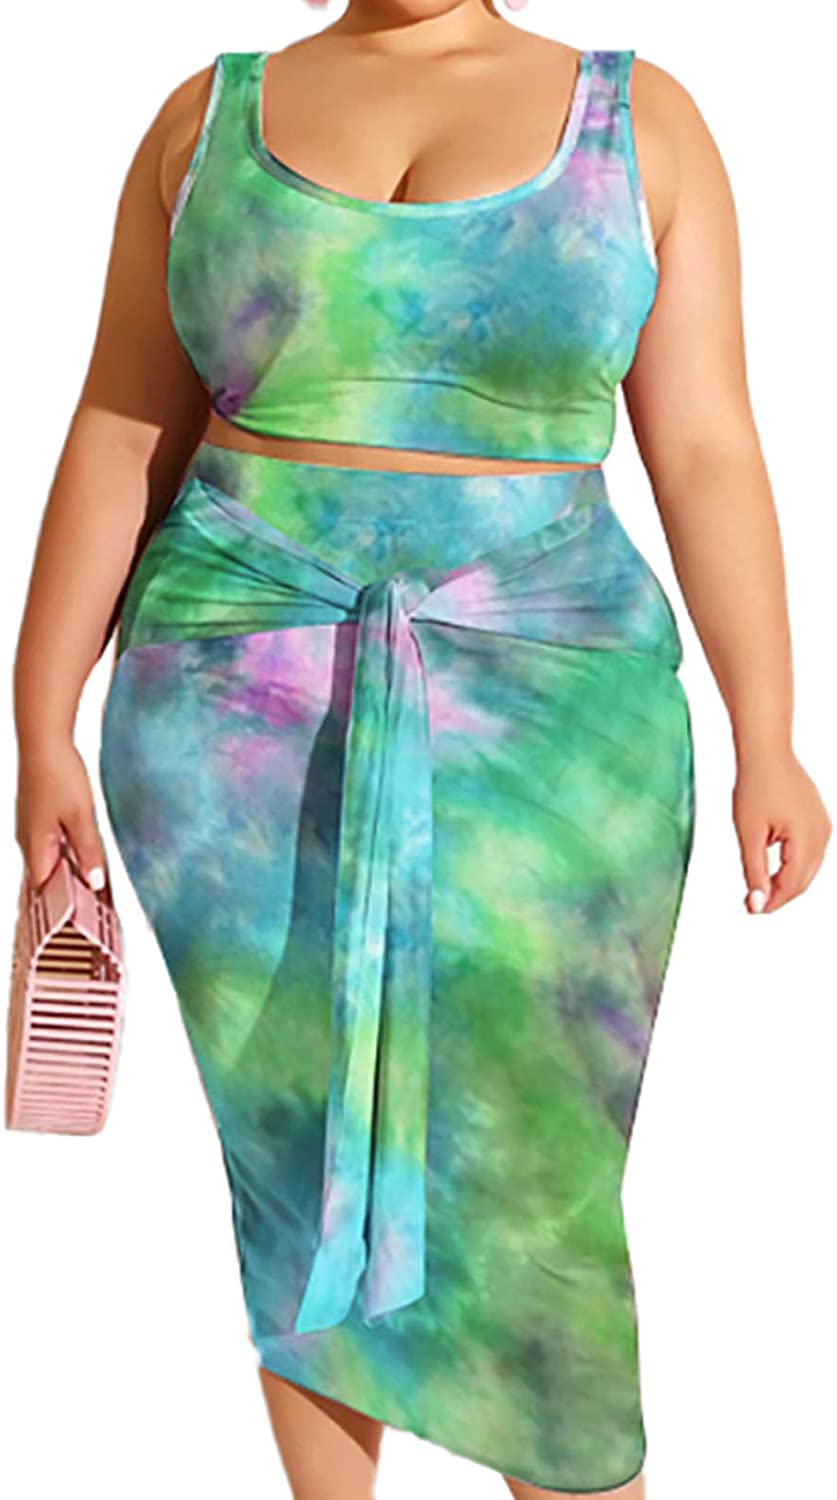 Stretchy Two Piece Dresses Bodycon Tanks Crop Top Plus Size Skirt Sets Bandage Midi Skirt Suits 